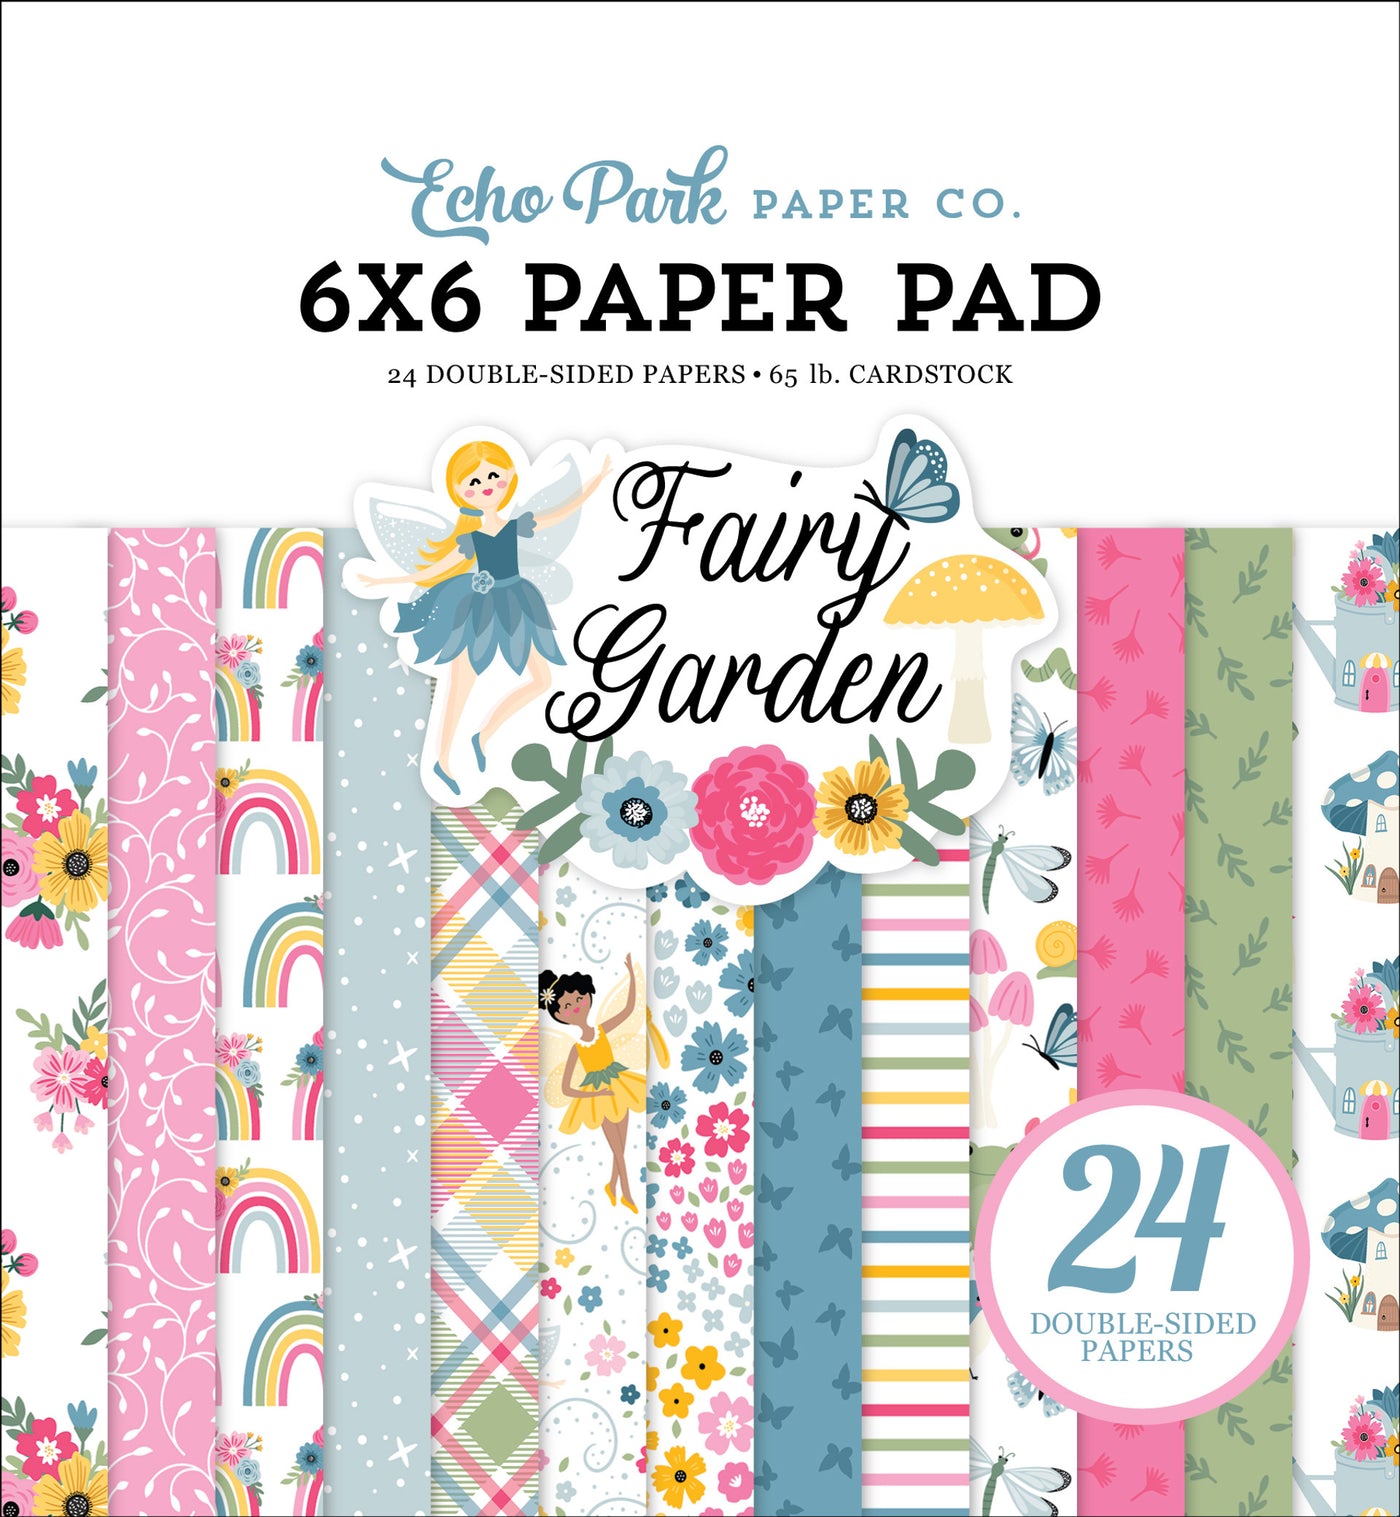 The 6x6 pad features cute designs and colors to celebrate the sweetest fairy garden! It's fun for cards and papercrafts, including 24 double-sided pages.